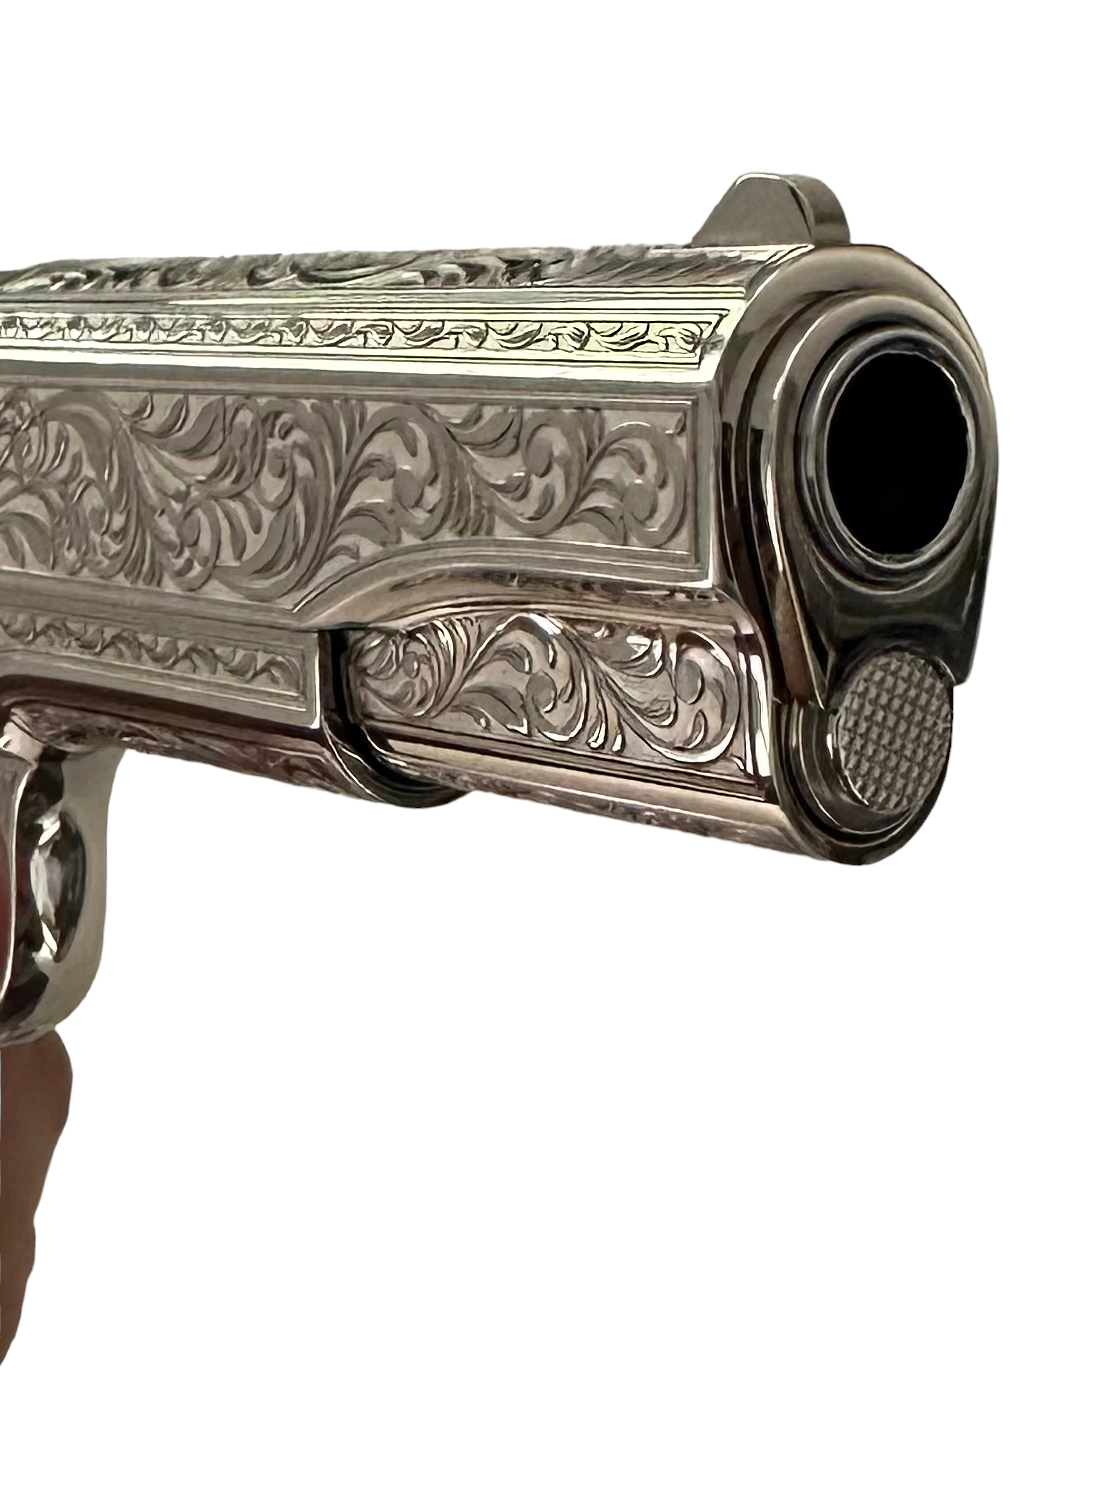 COLT CUSTOM 1911 FULLY ENGRAVED HIGH POLISHED AND NICKEL PLATED .45ACP